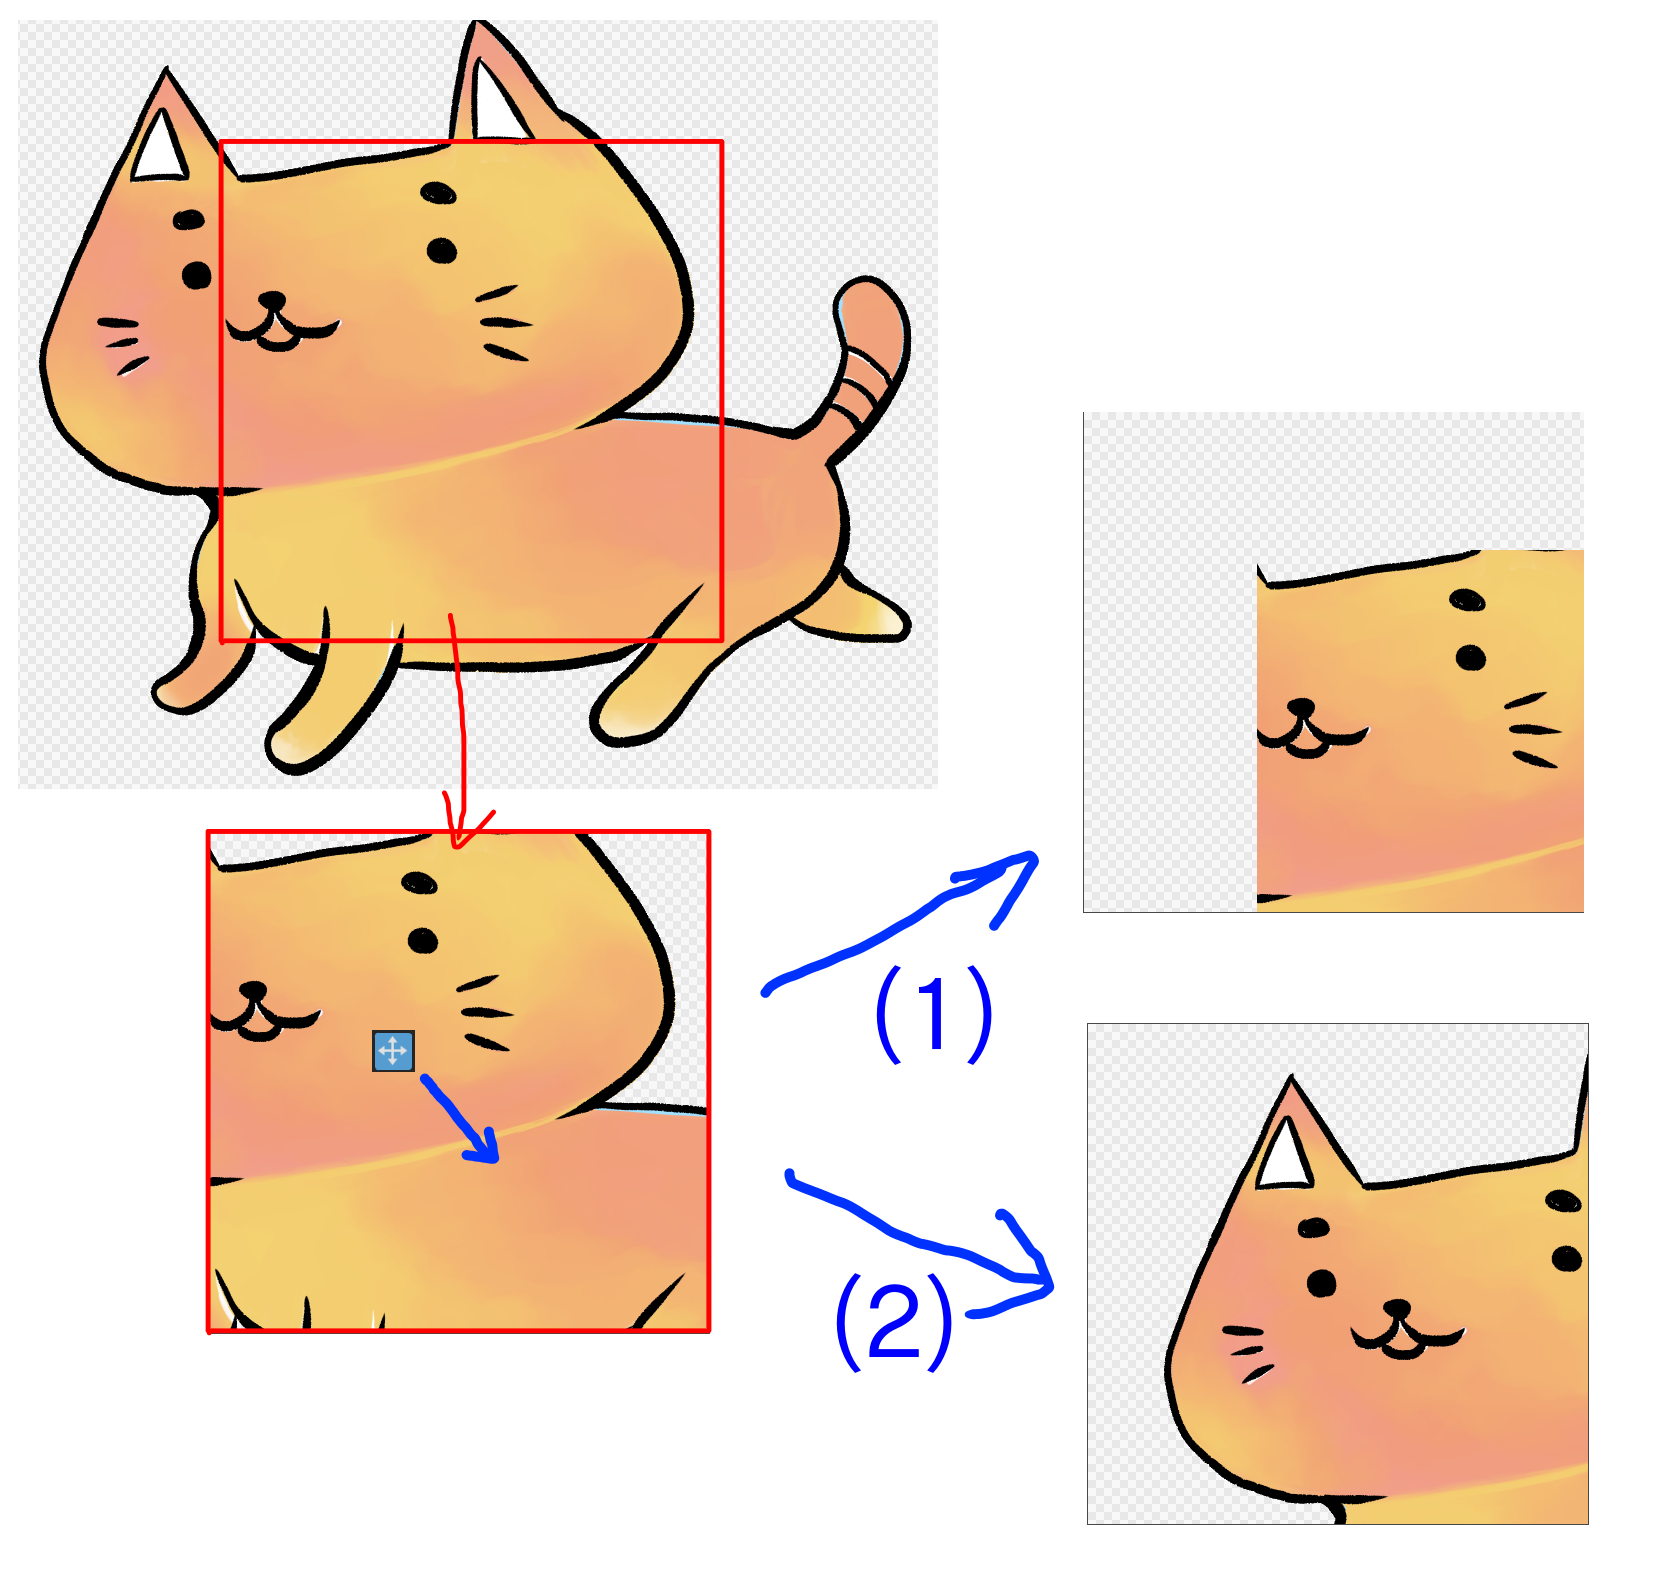 Difference when moving to the lower right after changing the canvas size